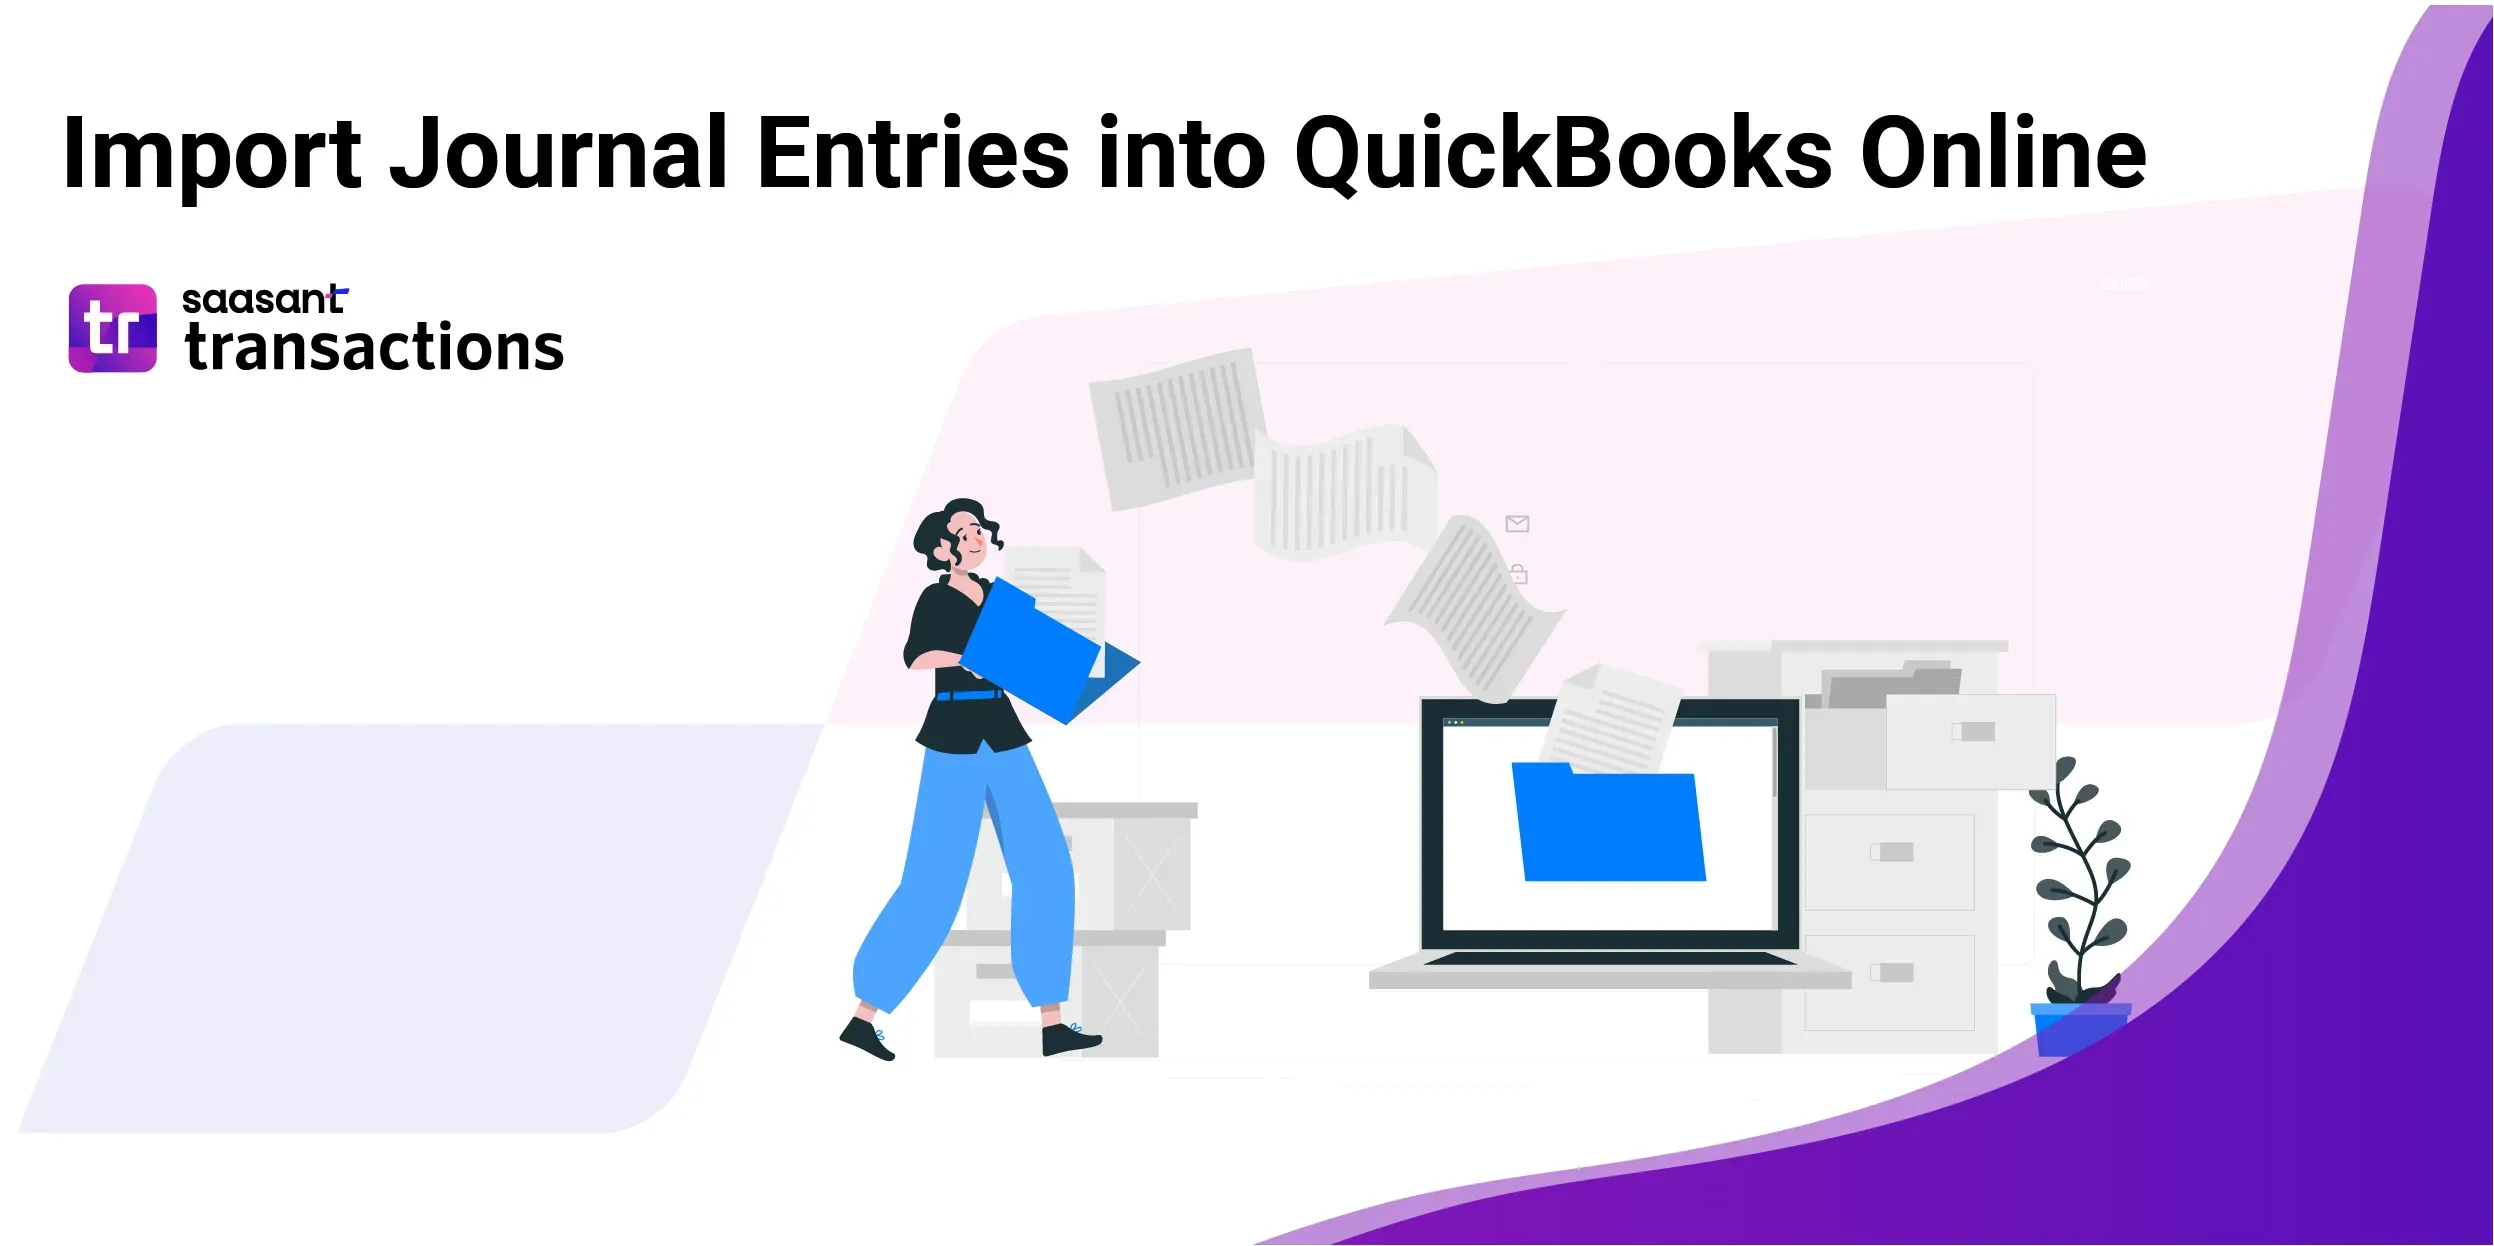 Import Journal Entries Into Quickbooks Online Step By Step Guide 7315